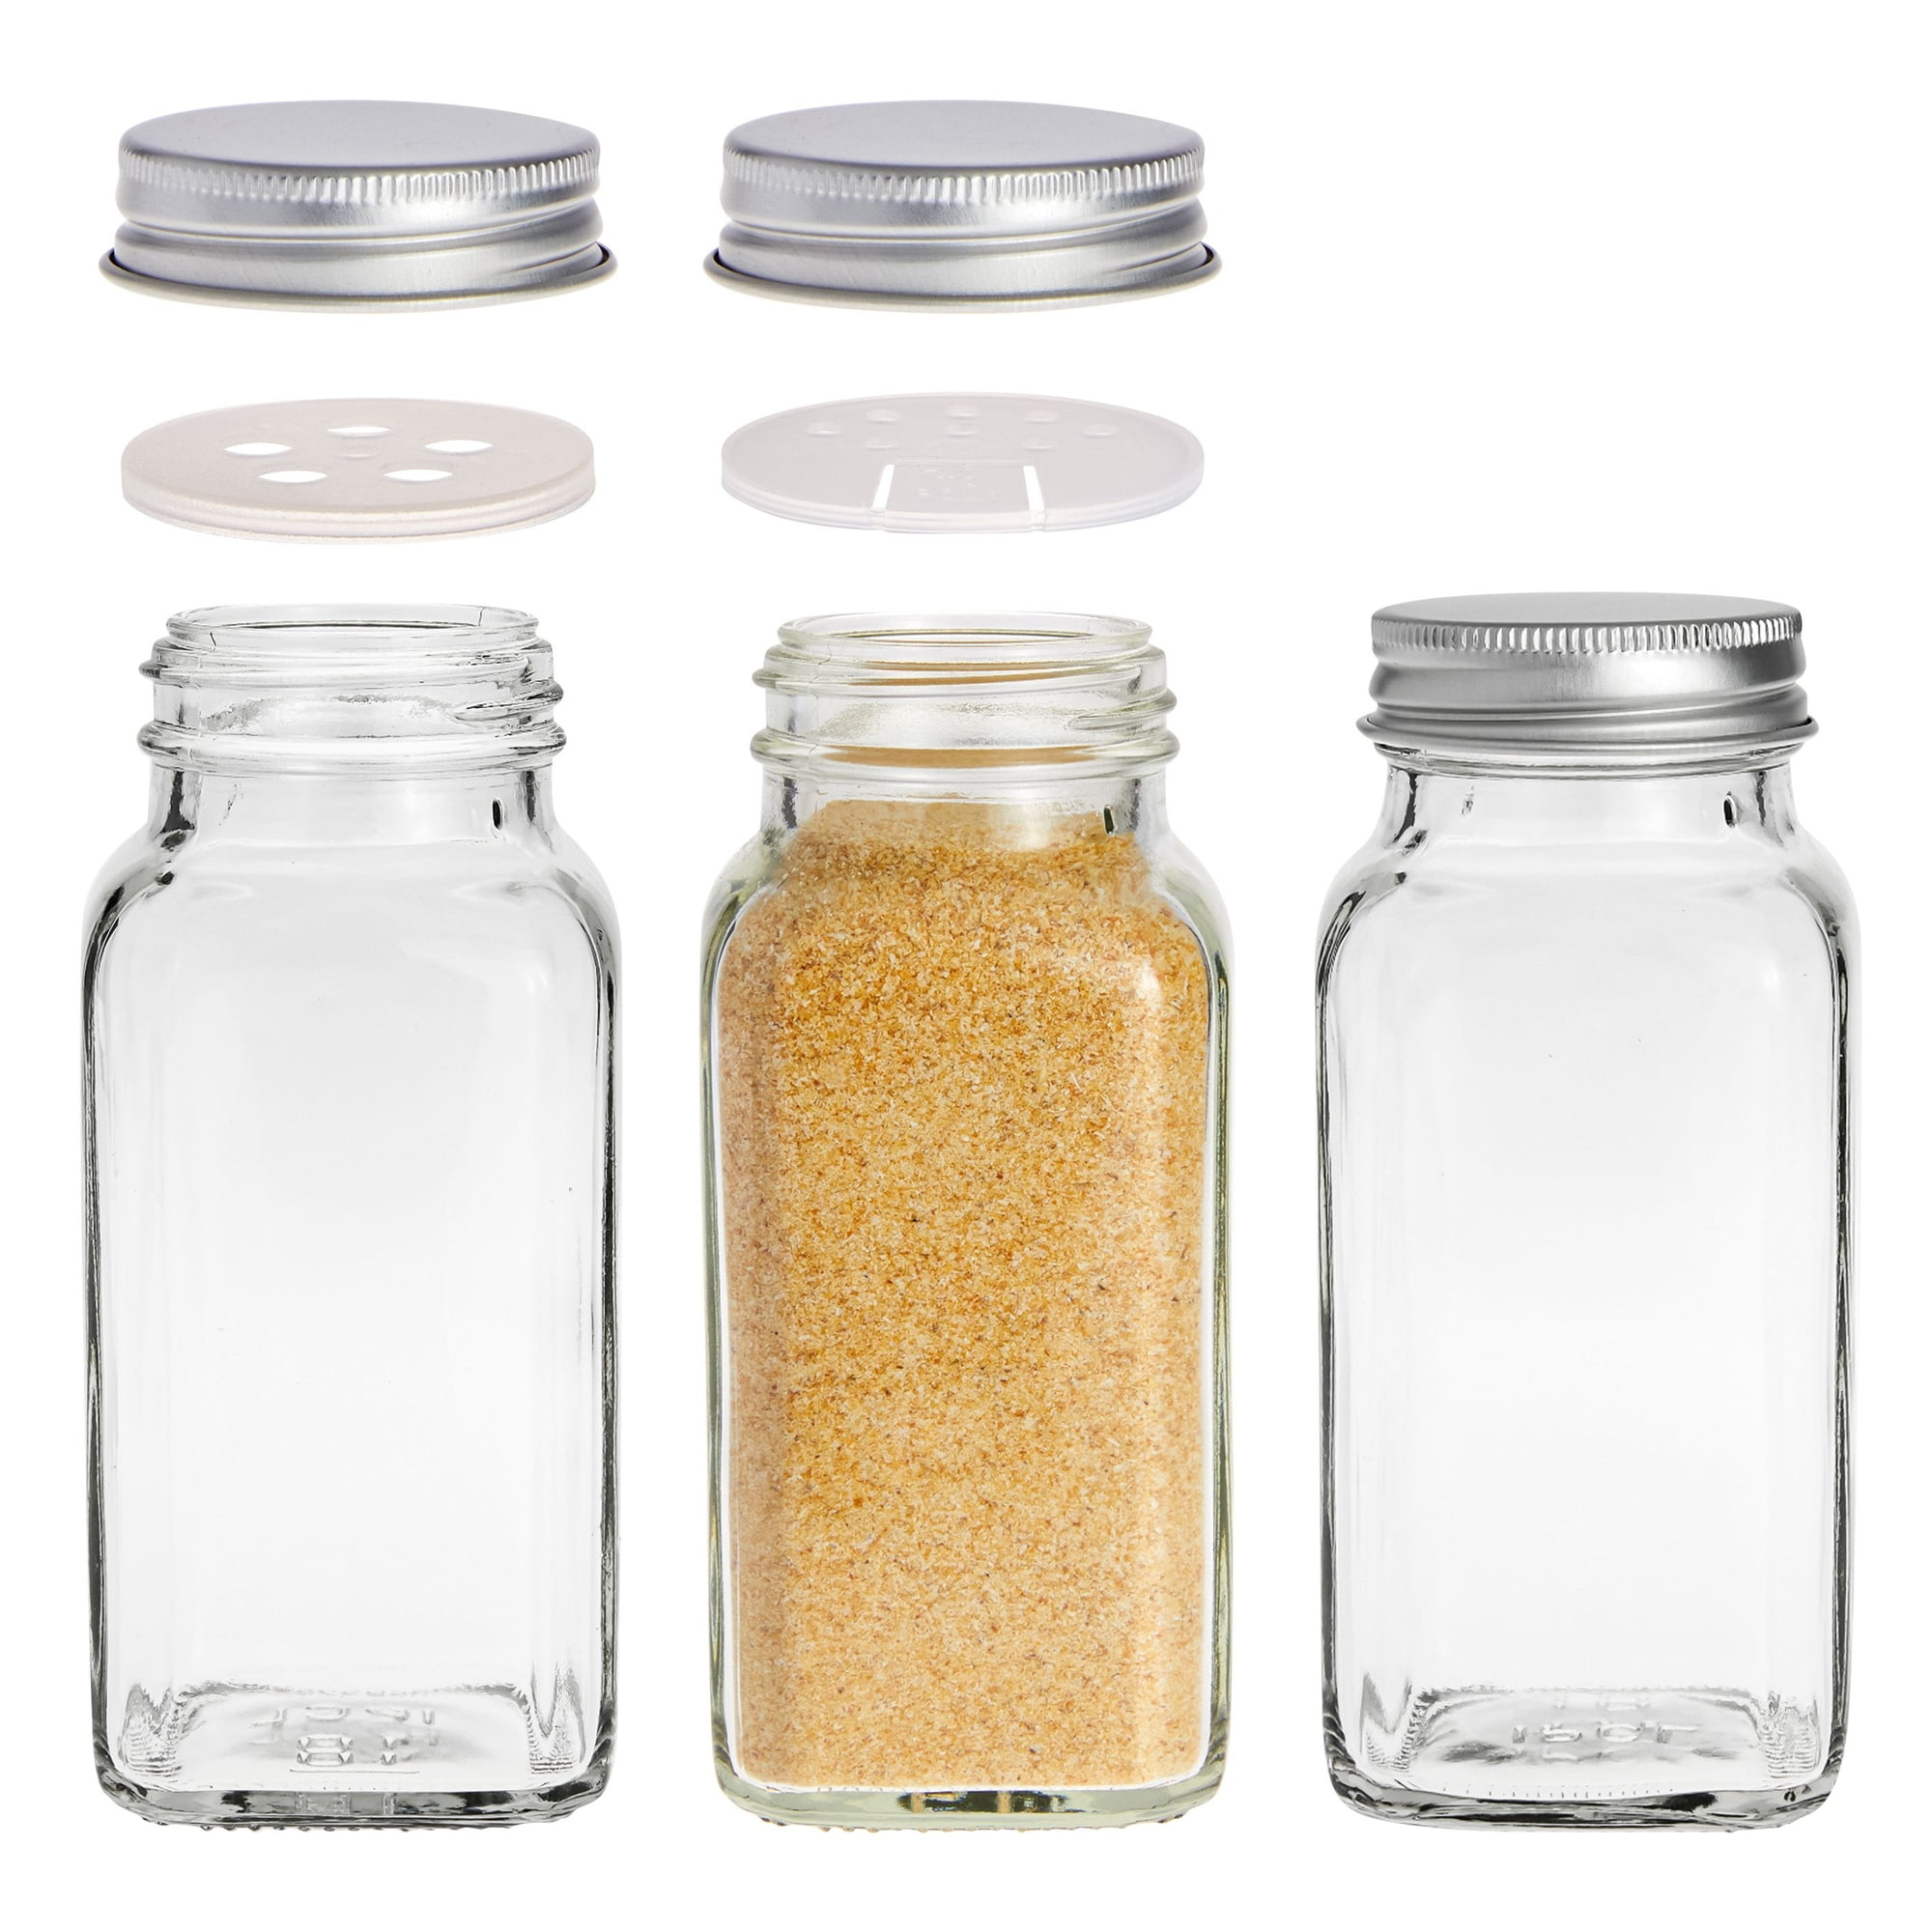 6oz, BEST VALUE 14 Glass Spice Jars includes pre-printed Spice Labels. 14  Square Empty Jars, Airtight Cap, Chalkboard & Clear Label, kitchen Funnel  Pour/Sift Shakers